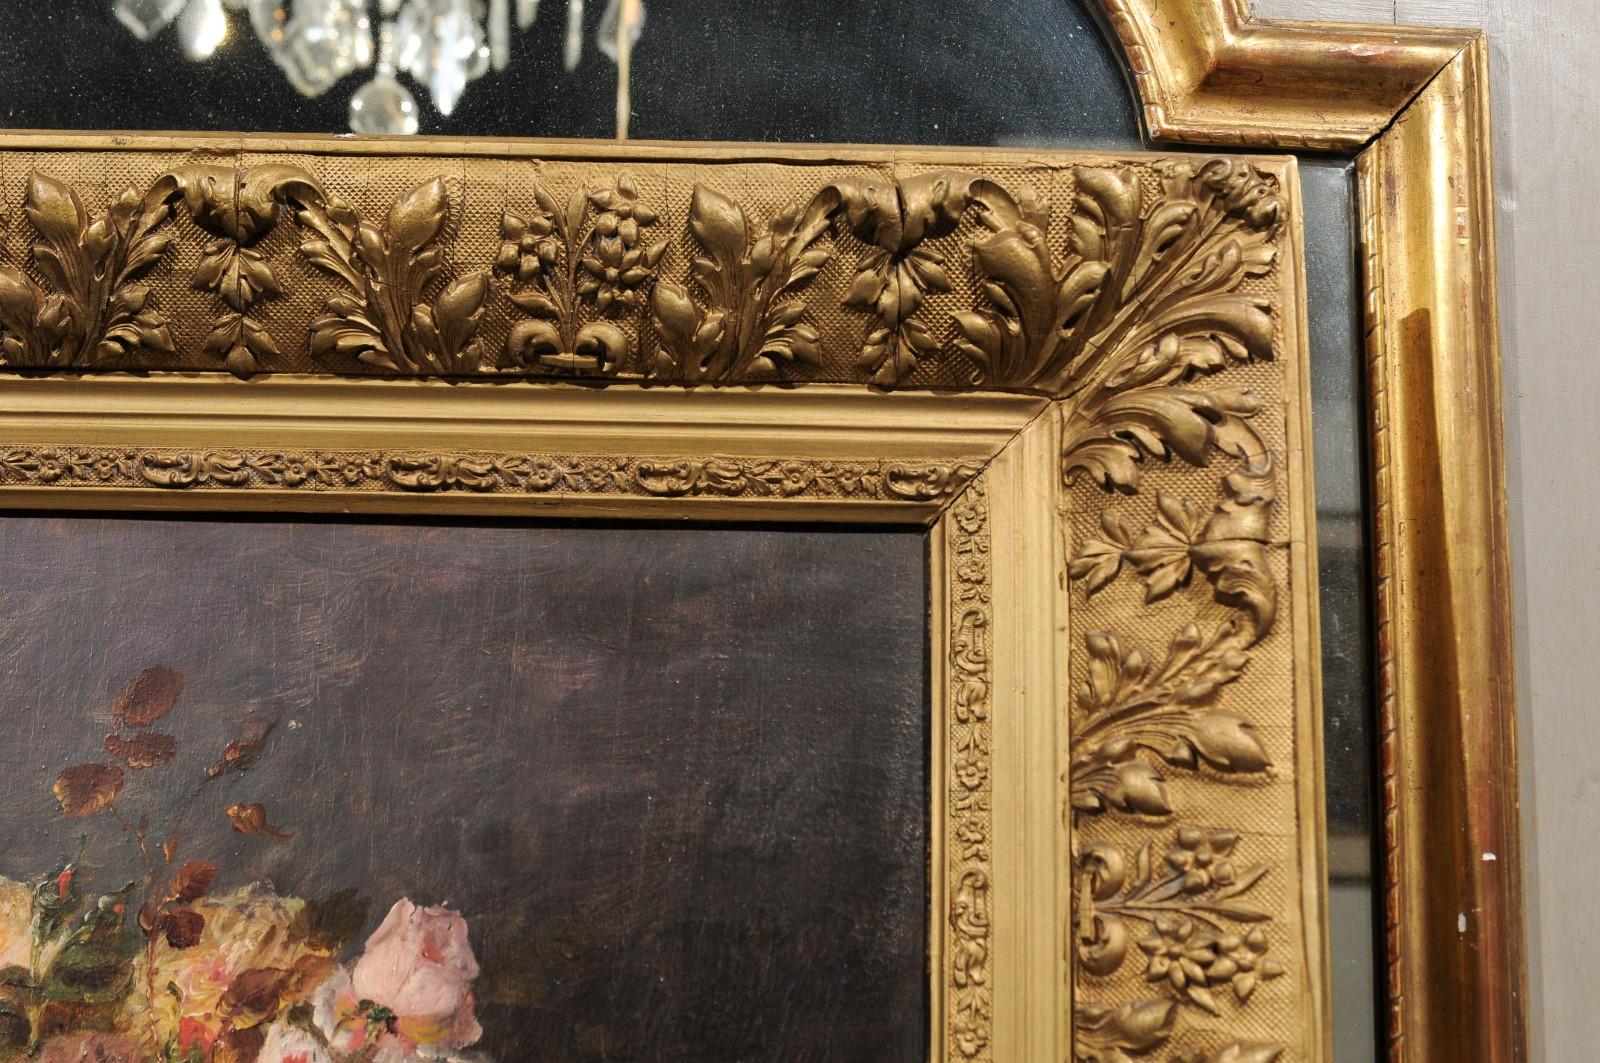 19th Century French Floral Still-Life Painting Depicting Roses in Original Frame In Good Condition For Sale In Atlanta, GA